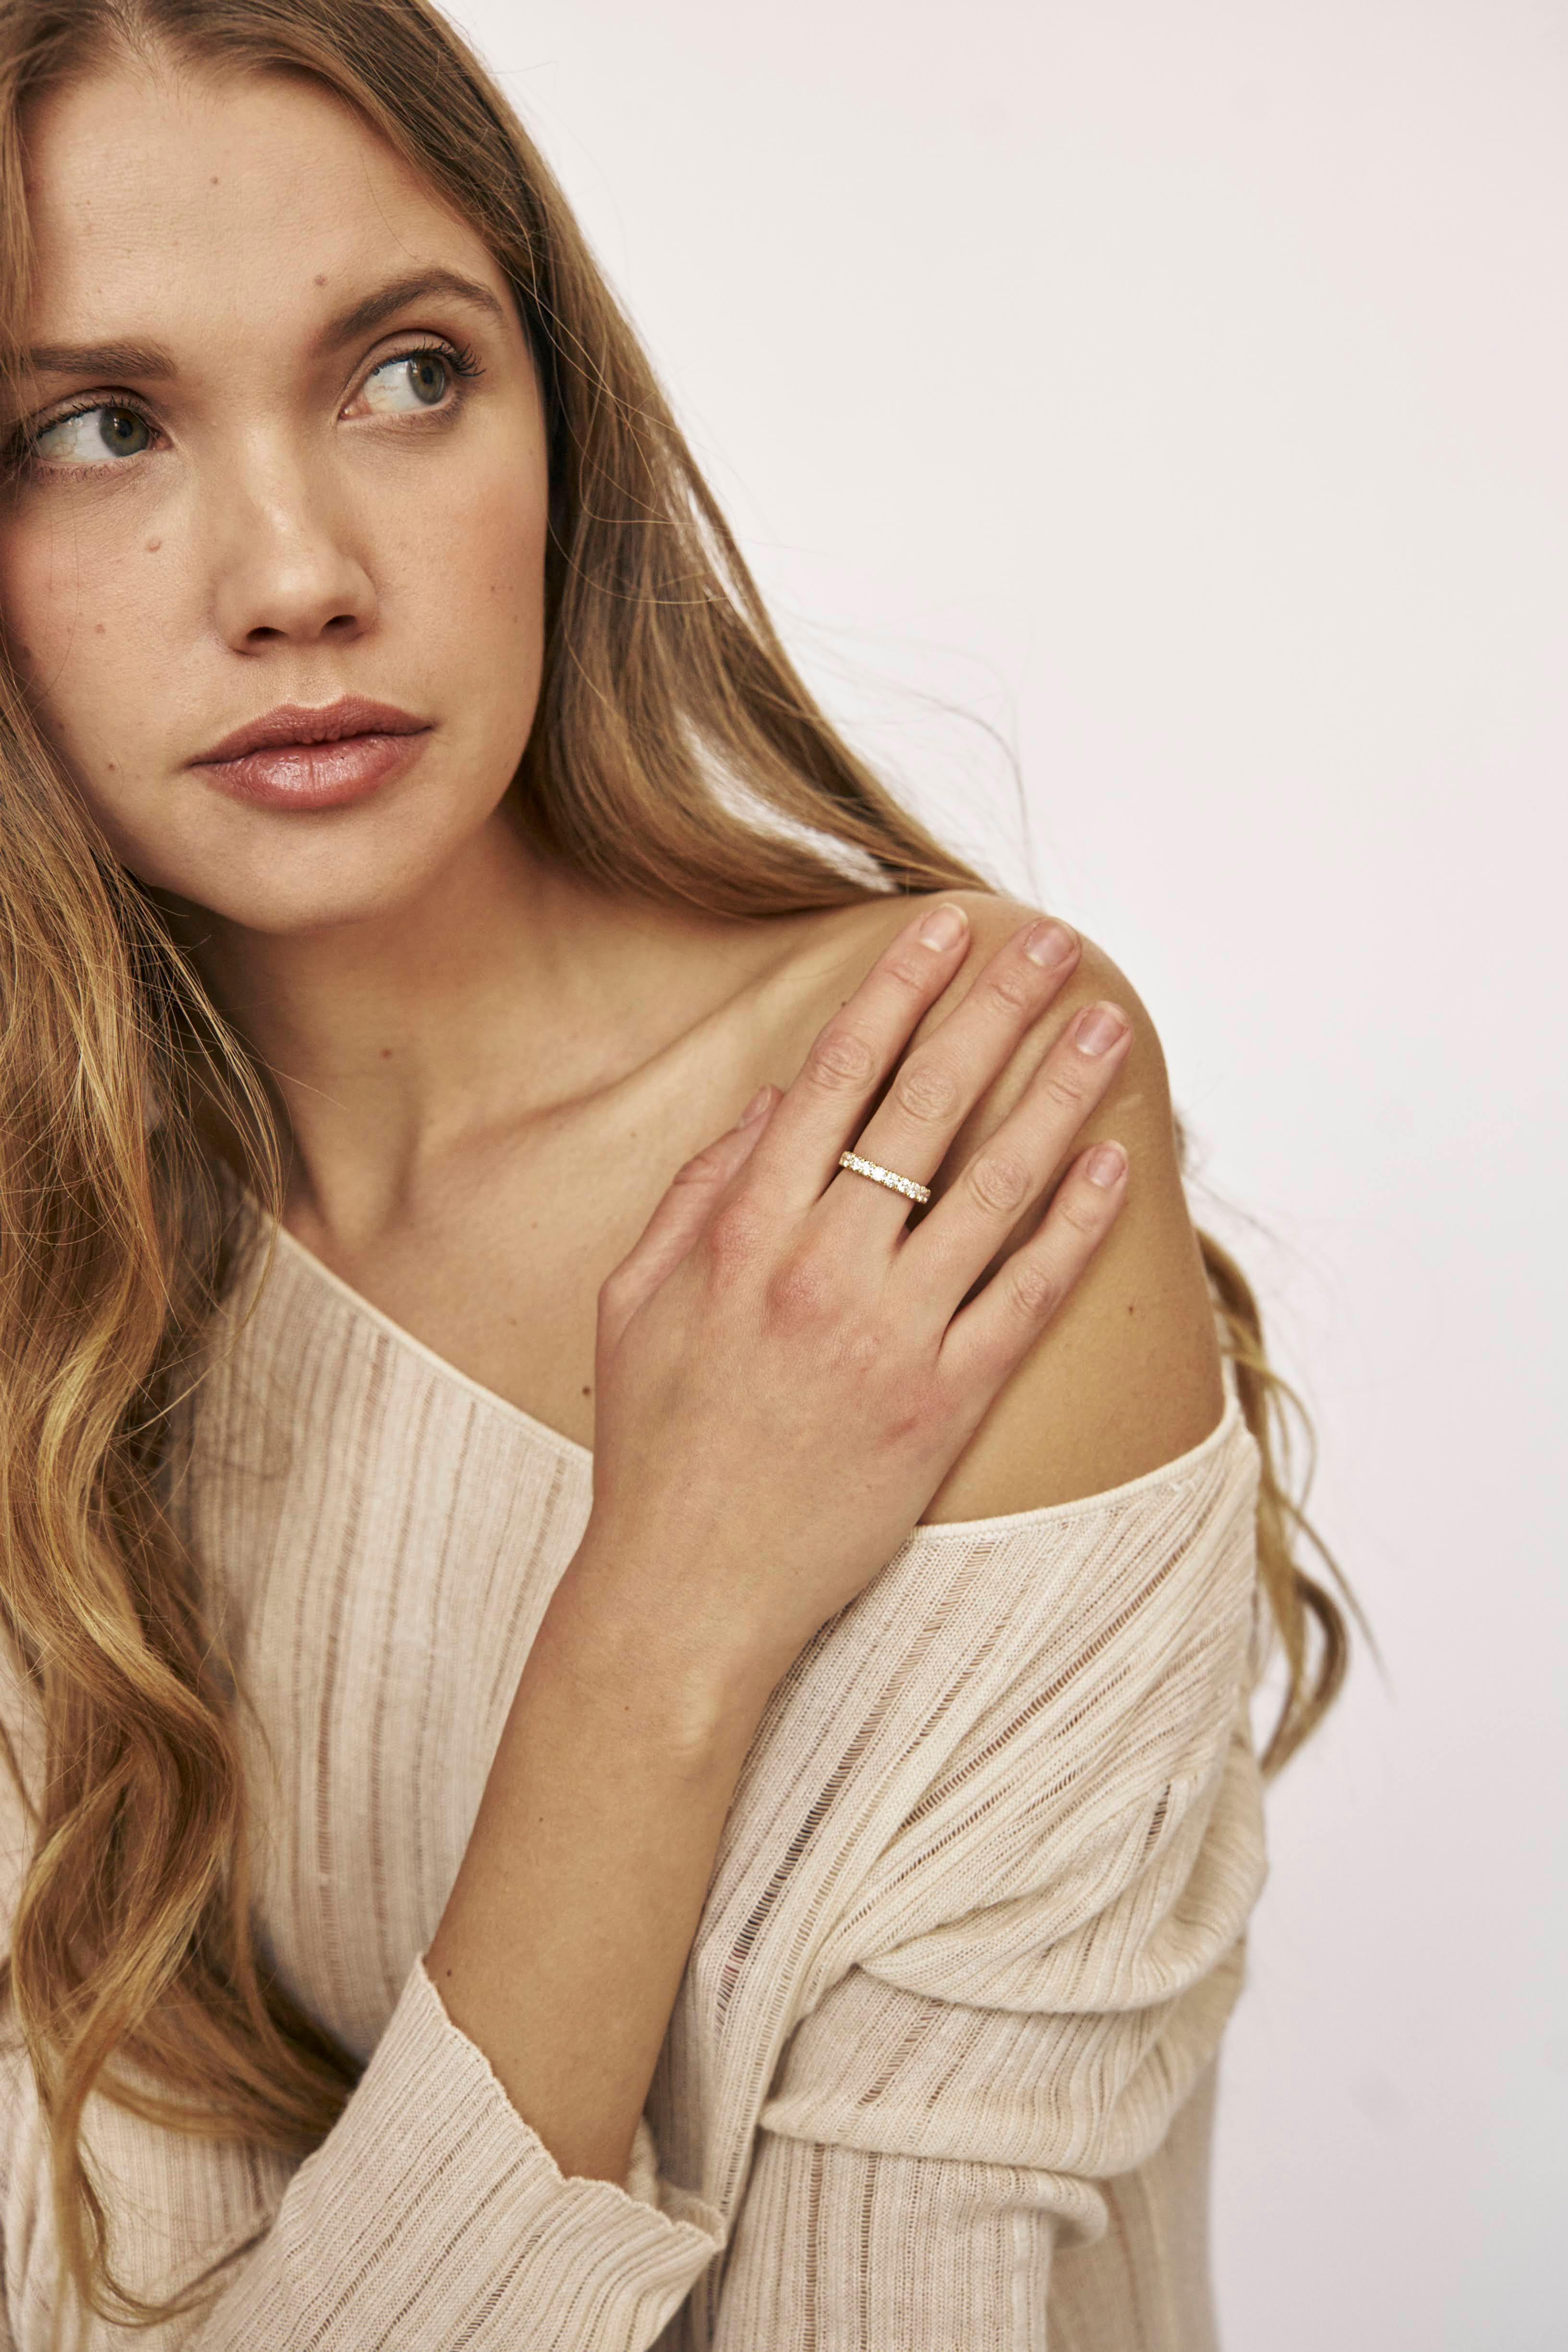 Our most classic and essential ring. Stack them together, with other rings or simply wear them alone. You can’t go wrong with the Half Band ring, in fact, you’ll love it!

18kt Yellow Gold
Dimensions: 2.3mm thick
Size: 6.5
Total Carat Weight: